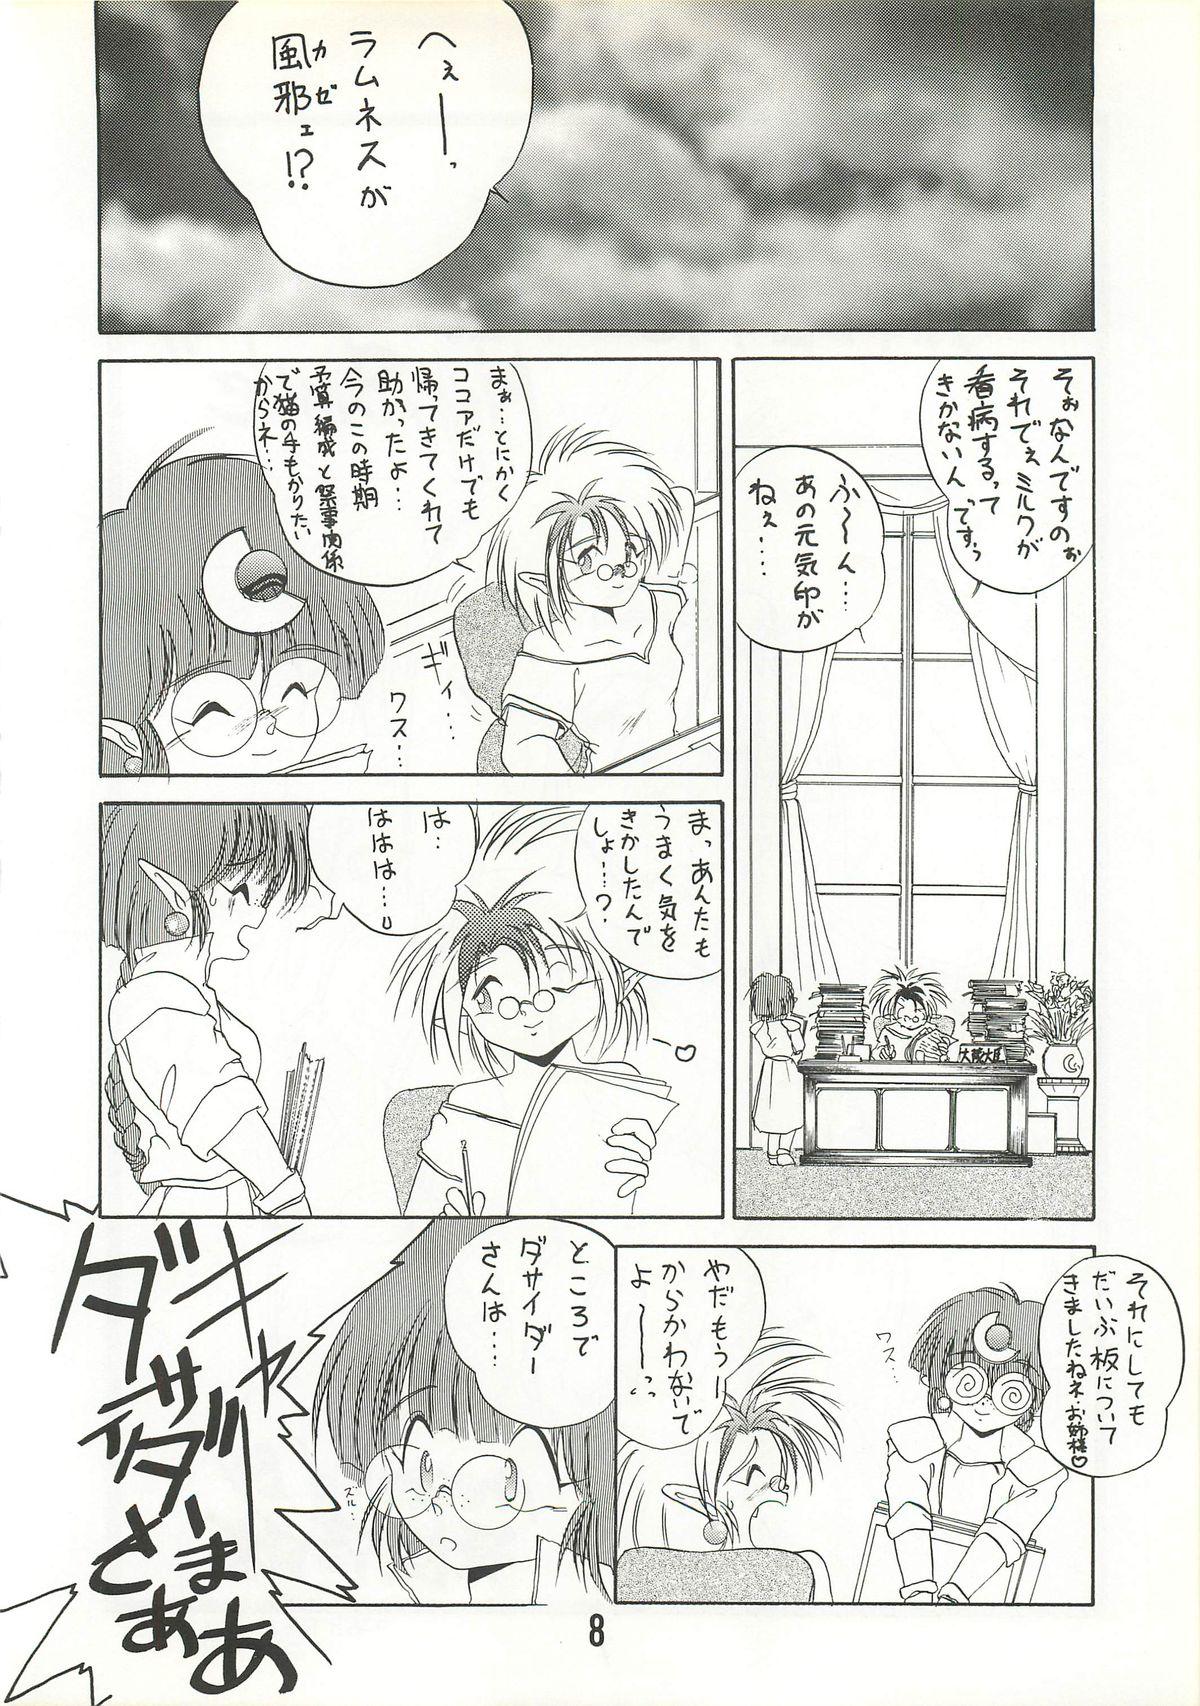 Sapphic Erotica MILKY BOX DX2 - Ng knight lamune and 40 Freckles - Page 7